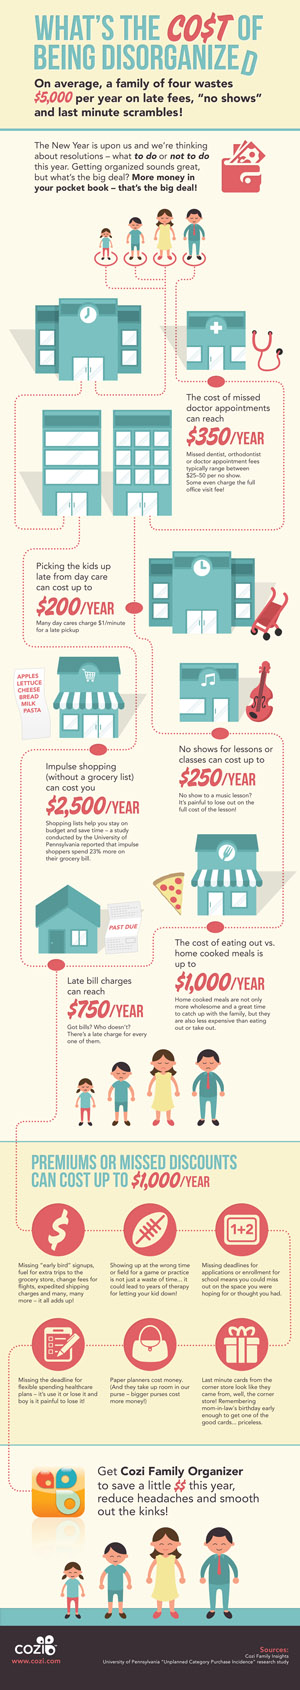 The High Cost of Disorganization Infographic